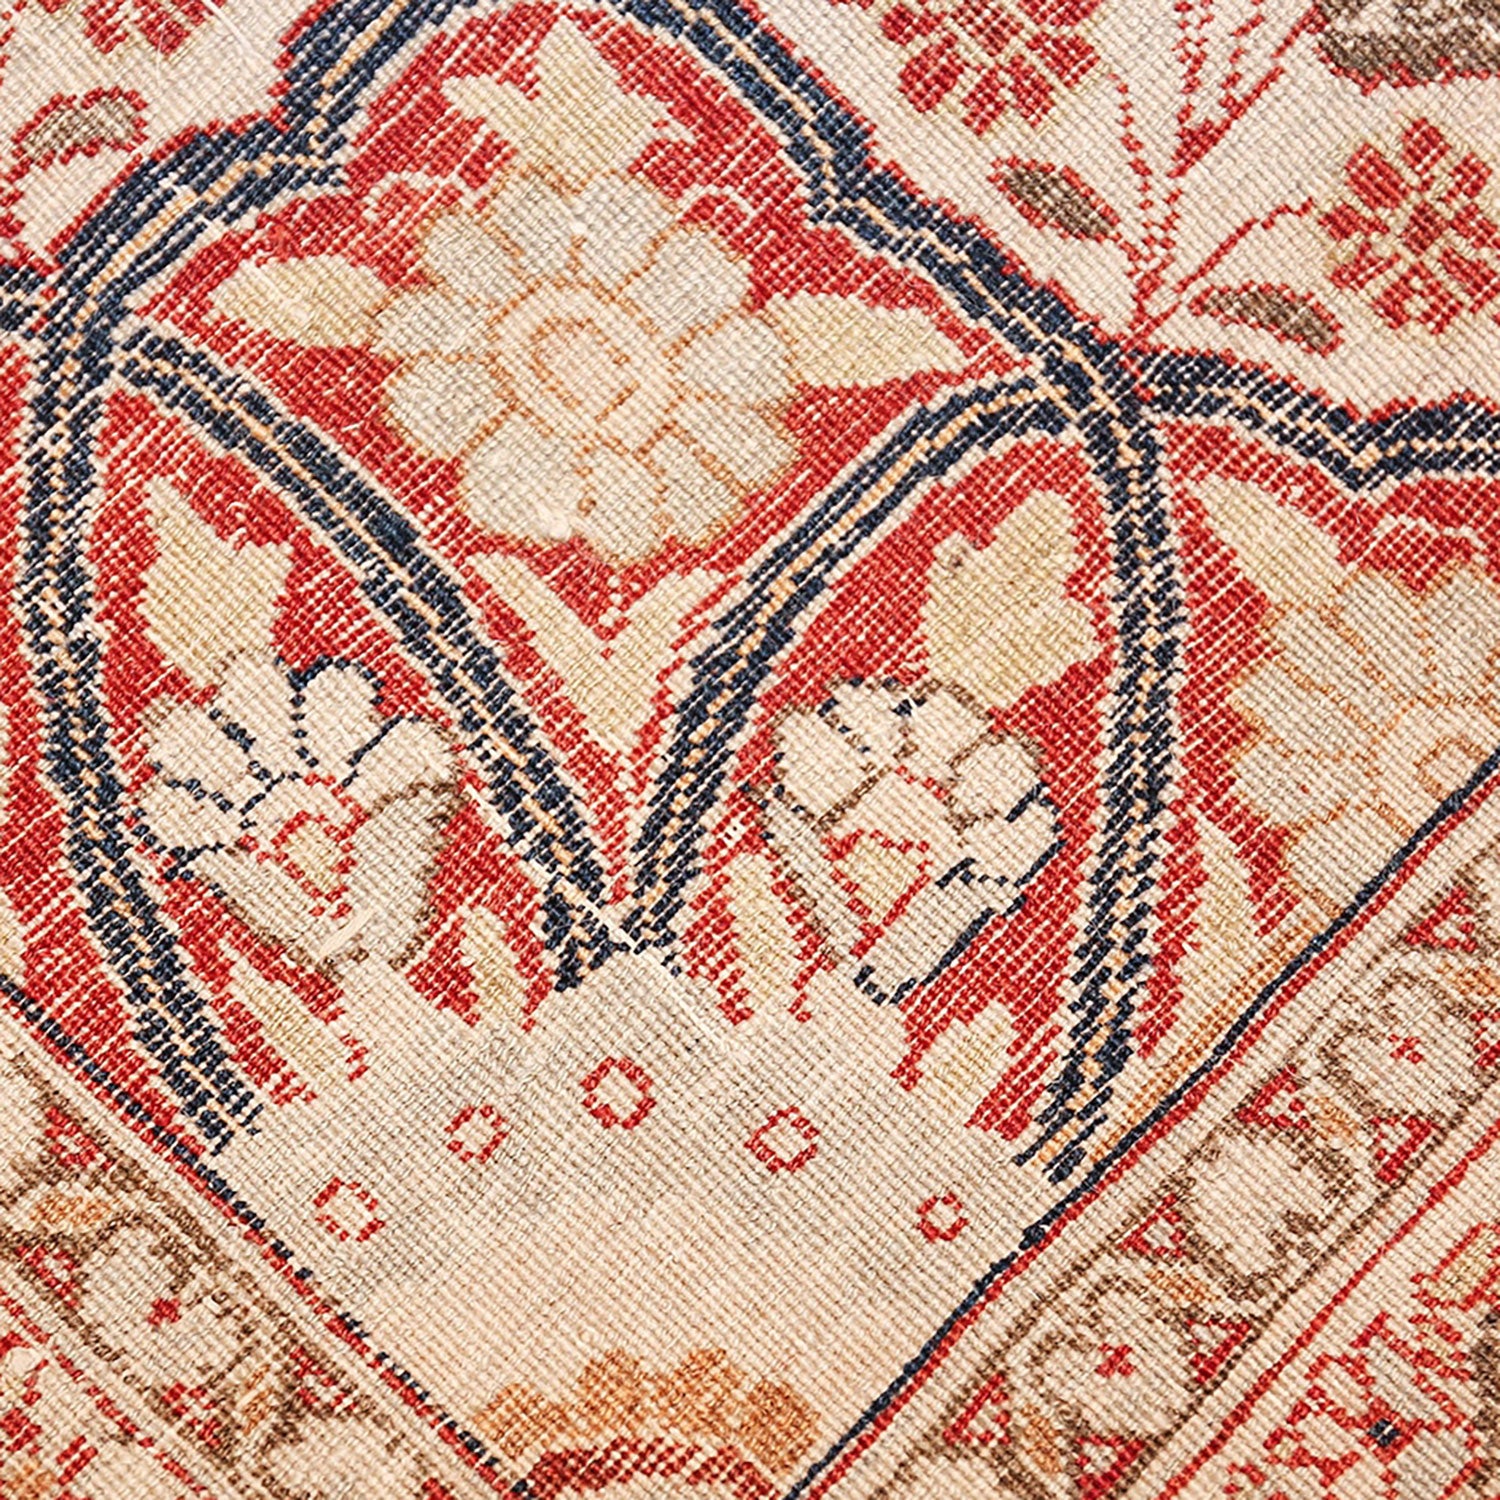 Captivating close-up of a richly patterned fabric with intricate motifs